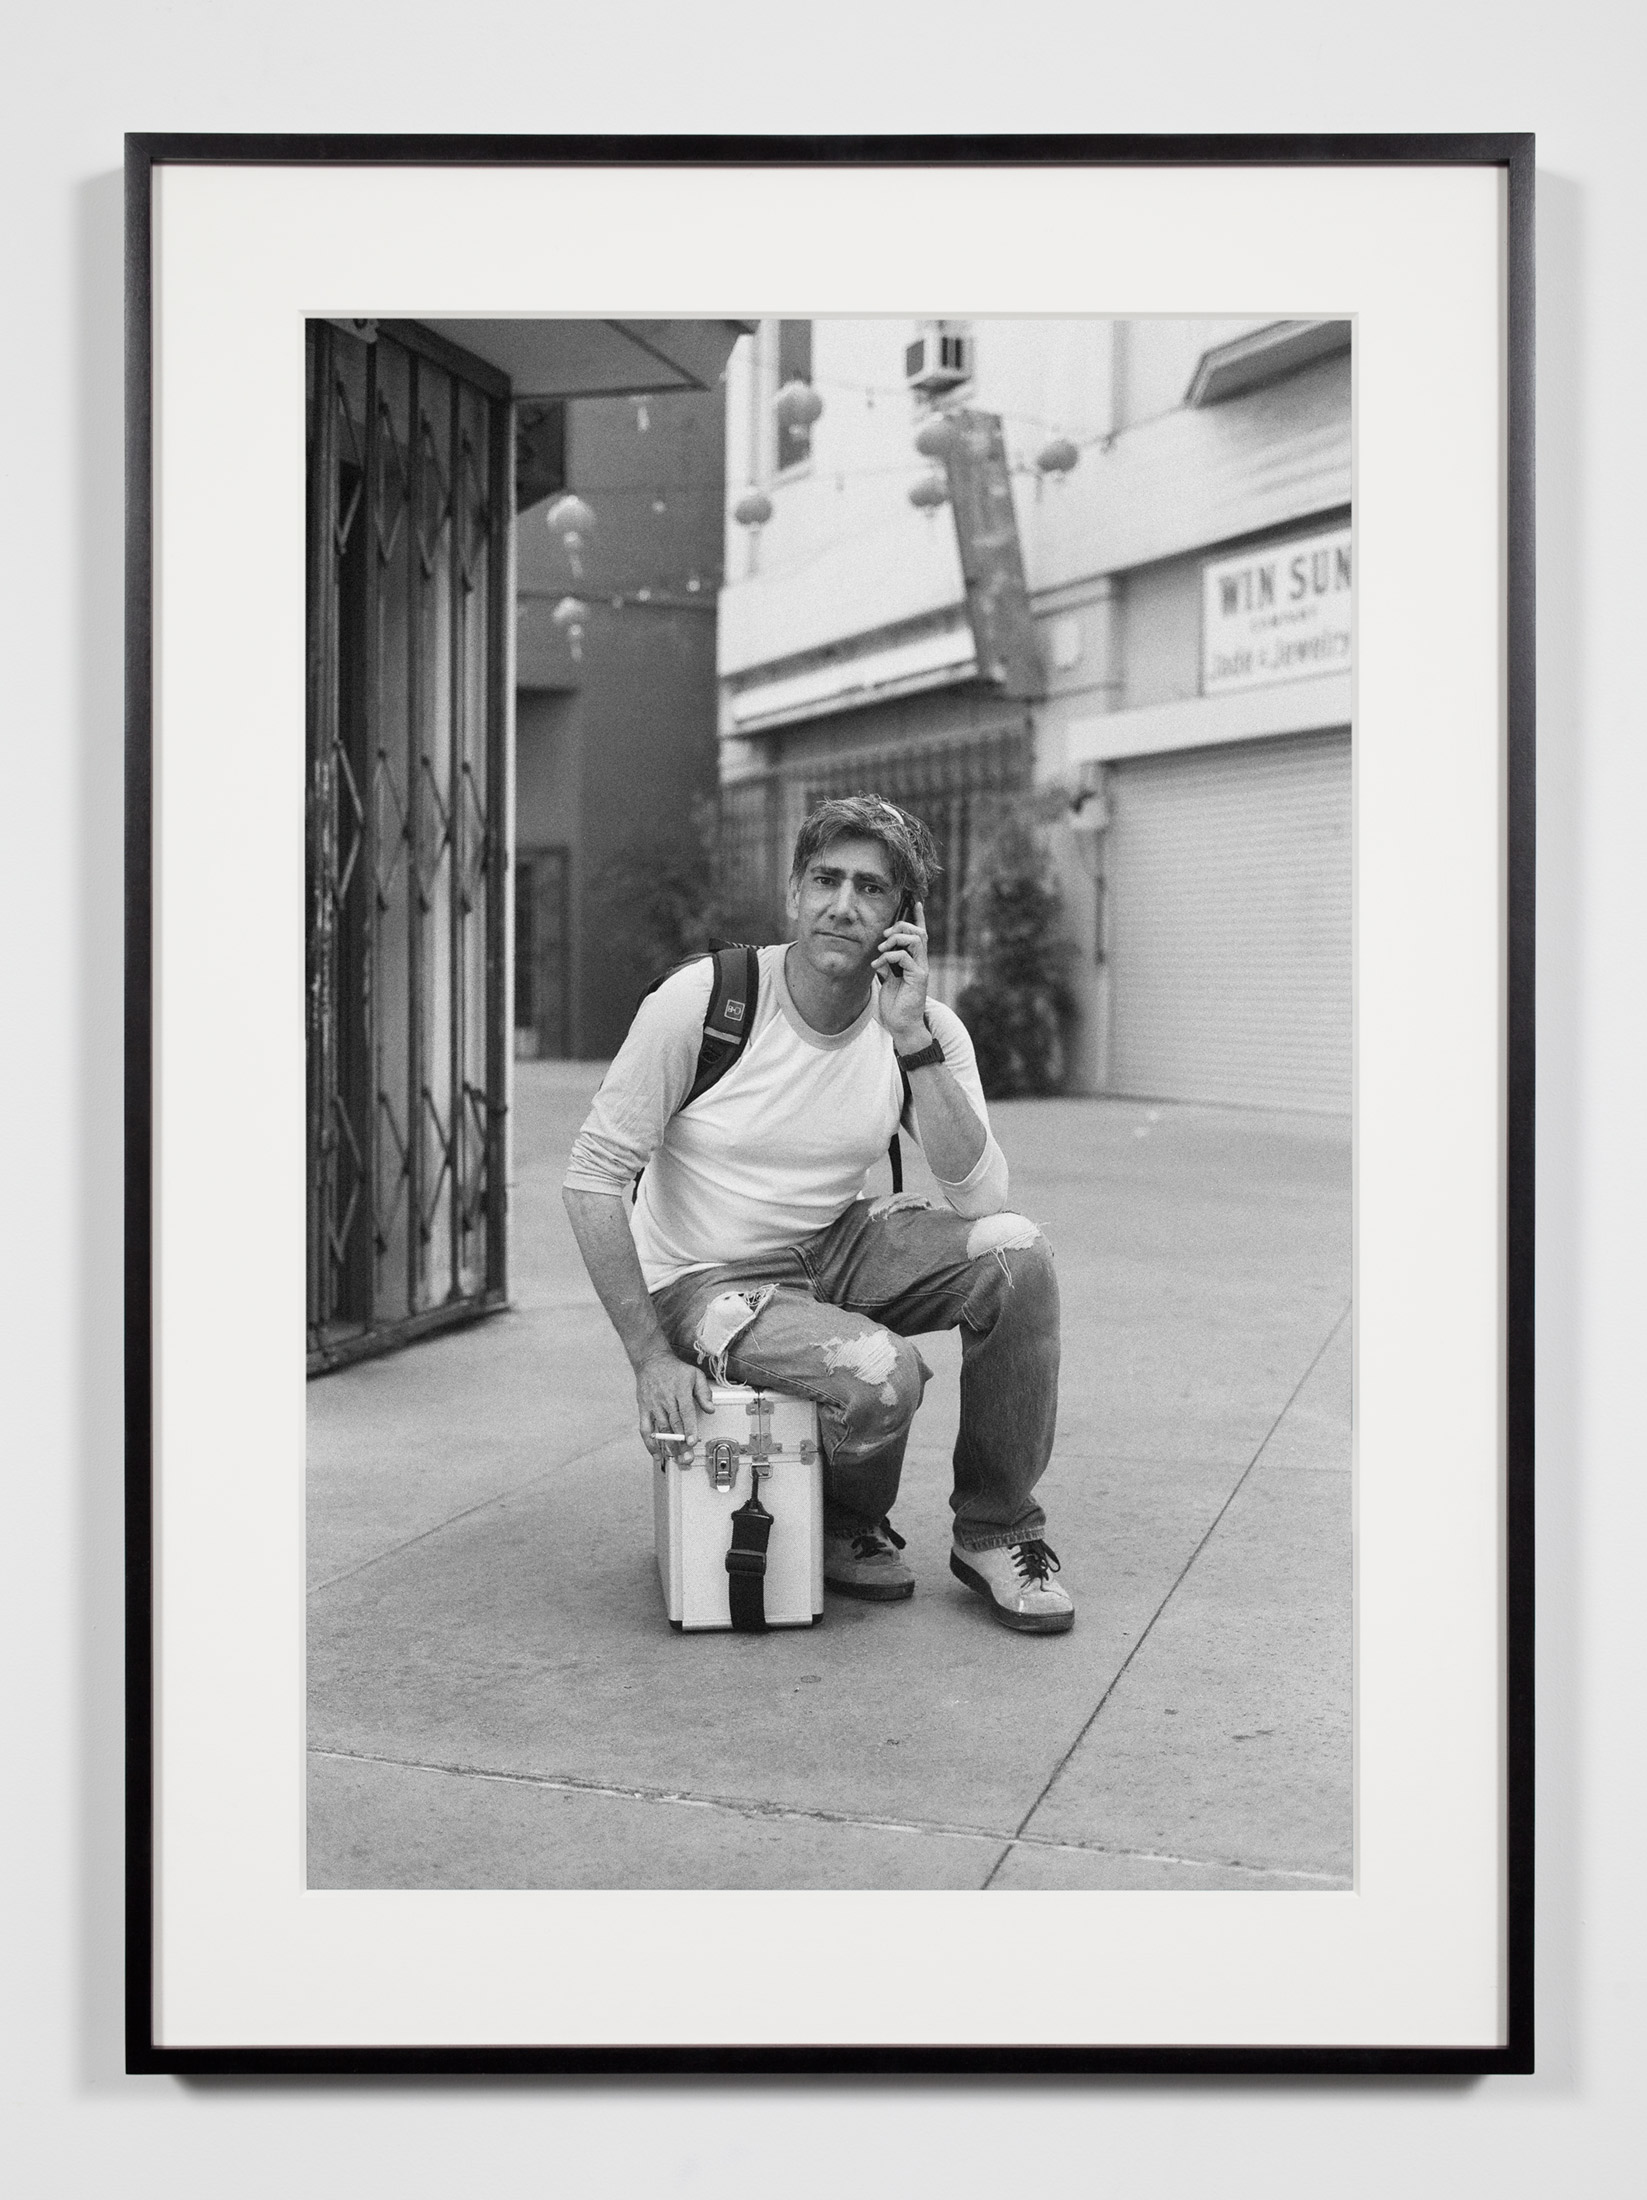   Gallery Preparator, Los Angeles, California, July 26, 2008    2011   Epson Ultrachrome K3 archival ink jet print on Hahnemühle Photo Rag paper  36 3/8 x 26 3/8 inches   Industrial Portraits, 2008–     